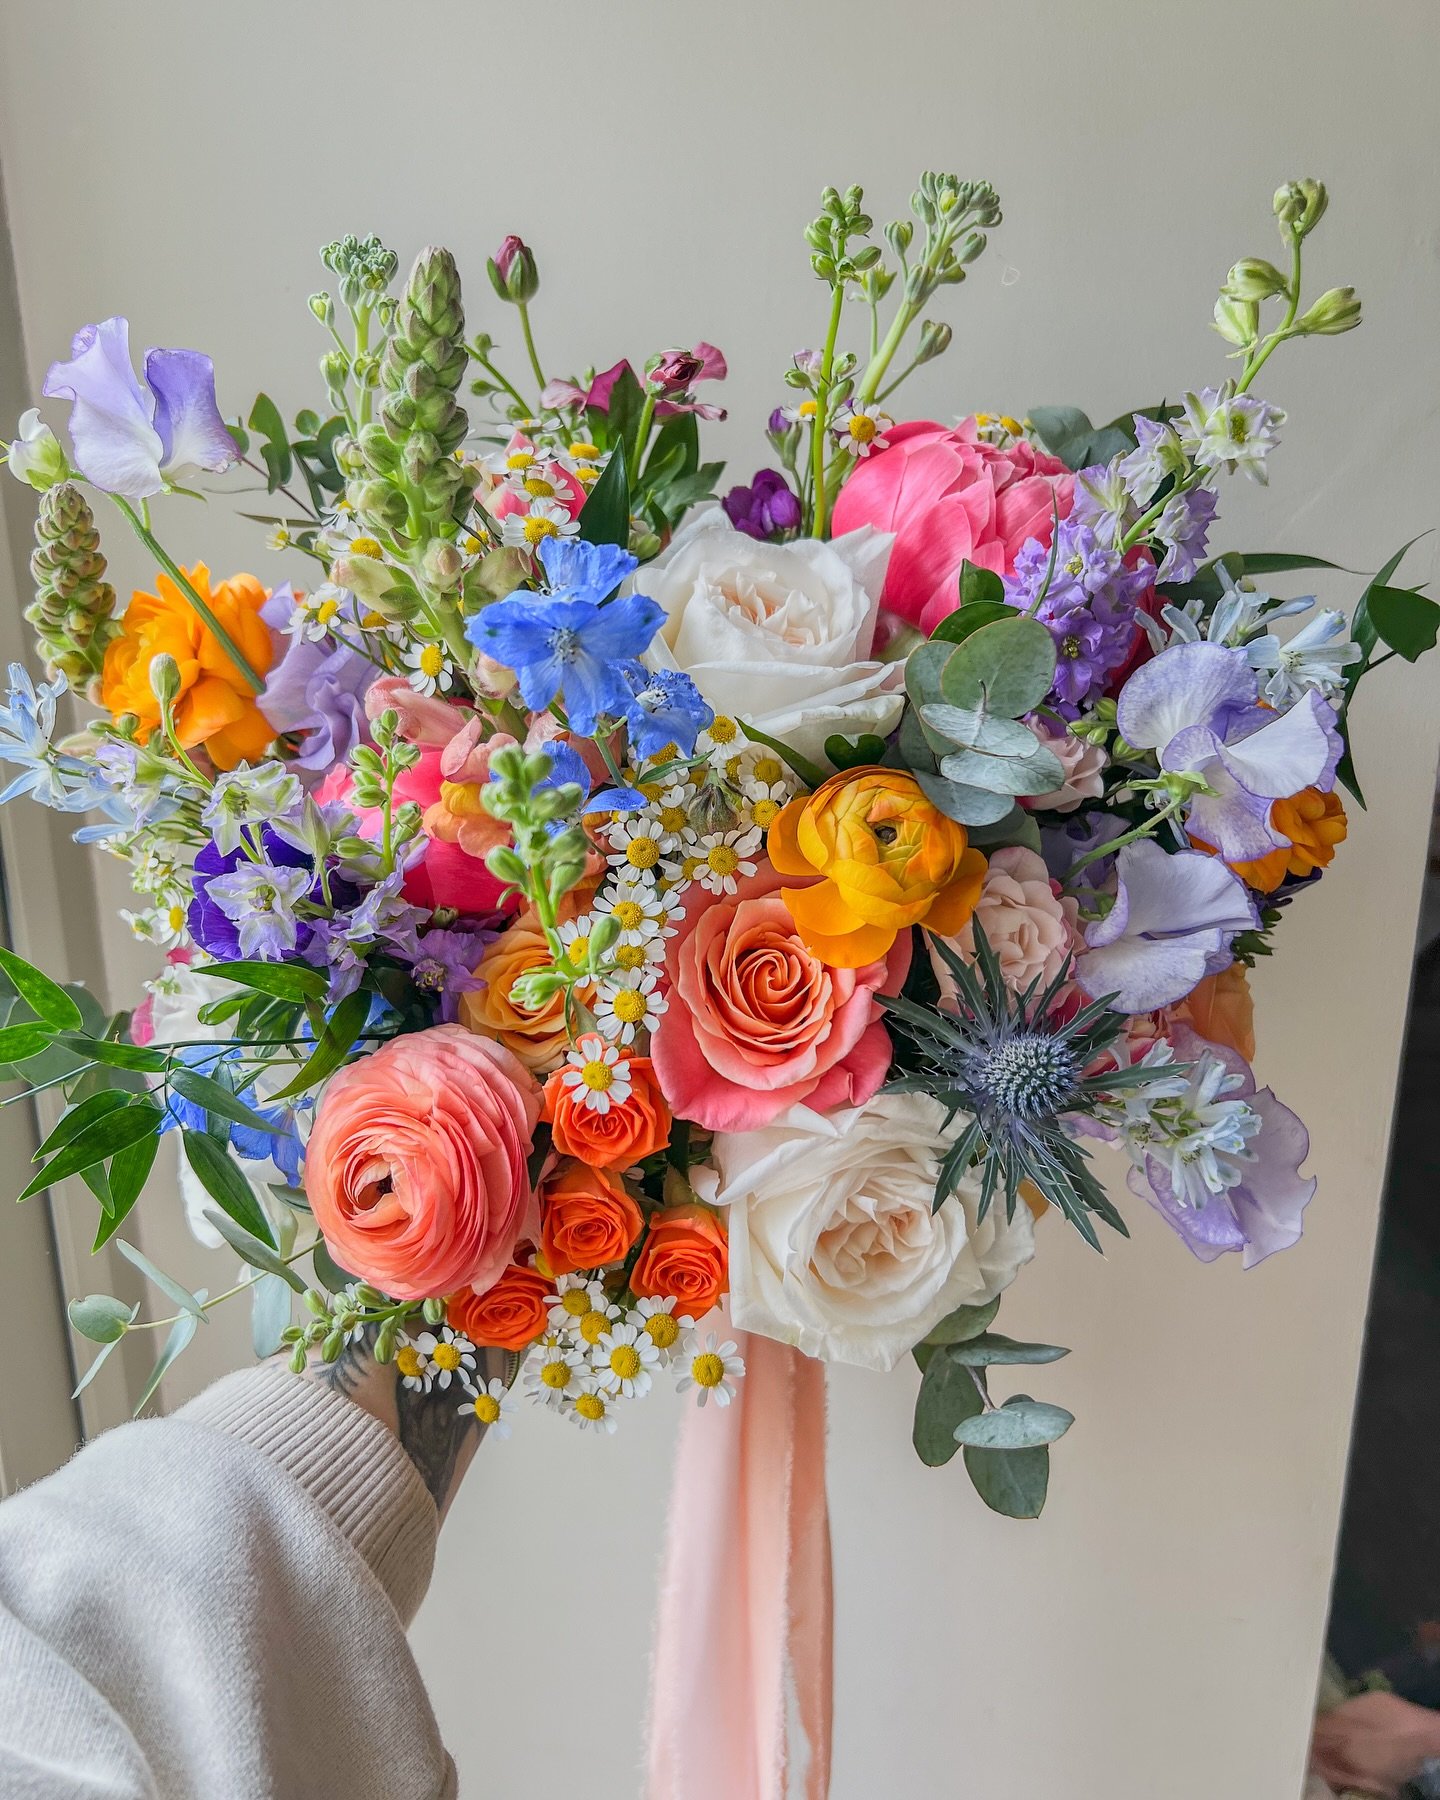 ✨🪩FOR CHARLOTTE🪩✨
.
Just a little throwback to last week, feel like Charlottes bouquet needs it&rsquo;s own space on the grid filled with so much beautiful colour 🧡